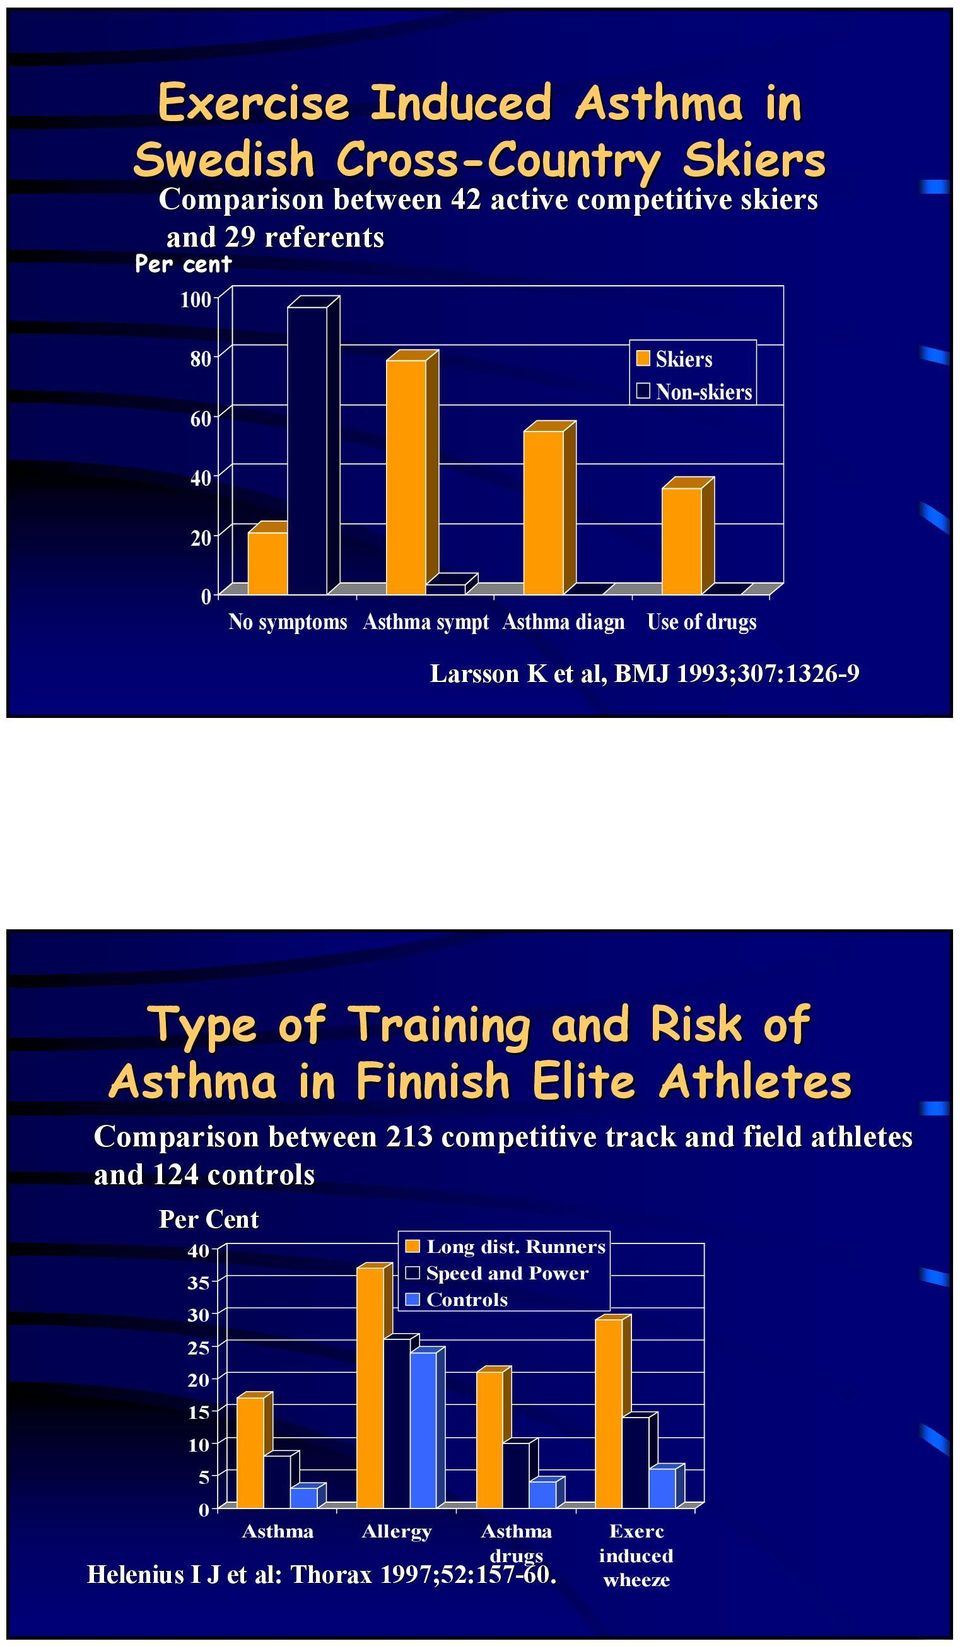 Risk of Asthma in Finnish Elite Athletes Comparison between 213 competitive track and field athletes and 124 controls Per Cent 40 35 30 25 20